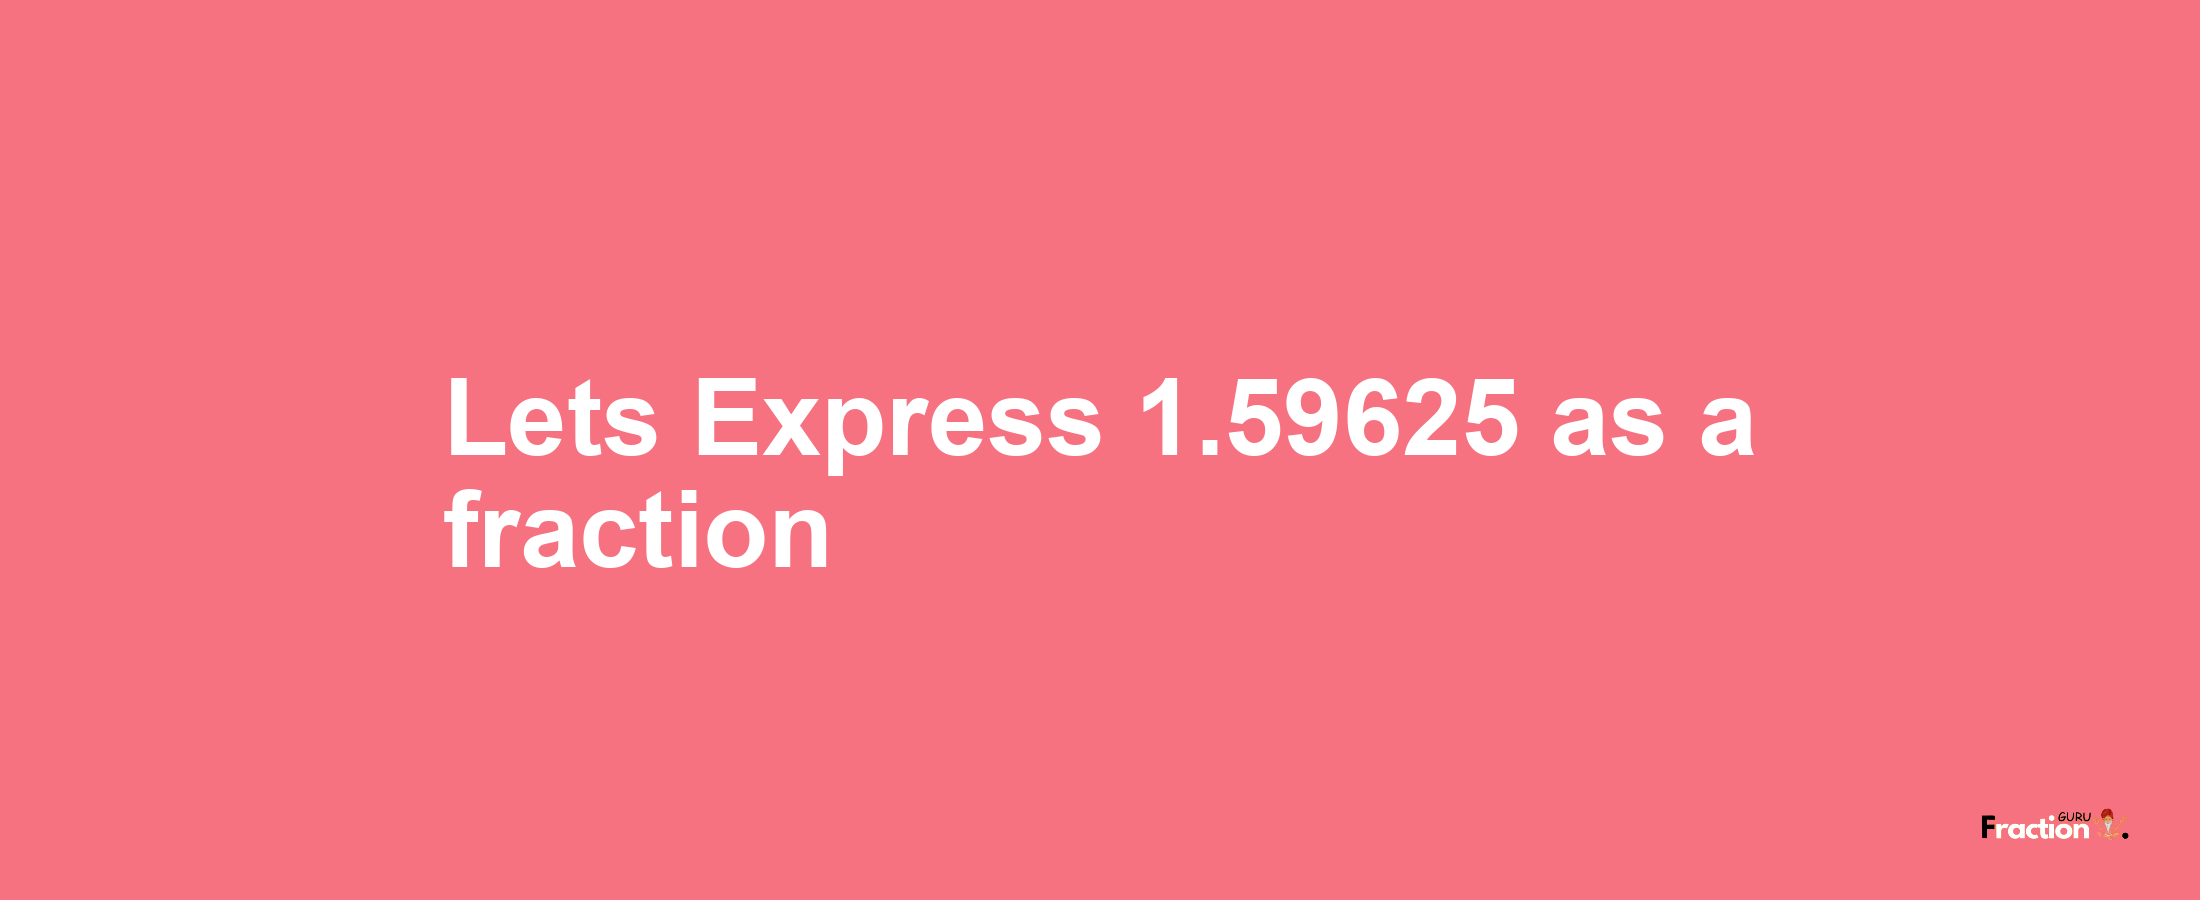 Lets Express 1.59625 as afraction